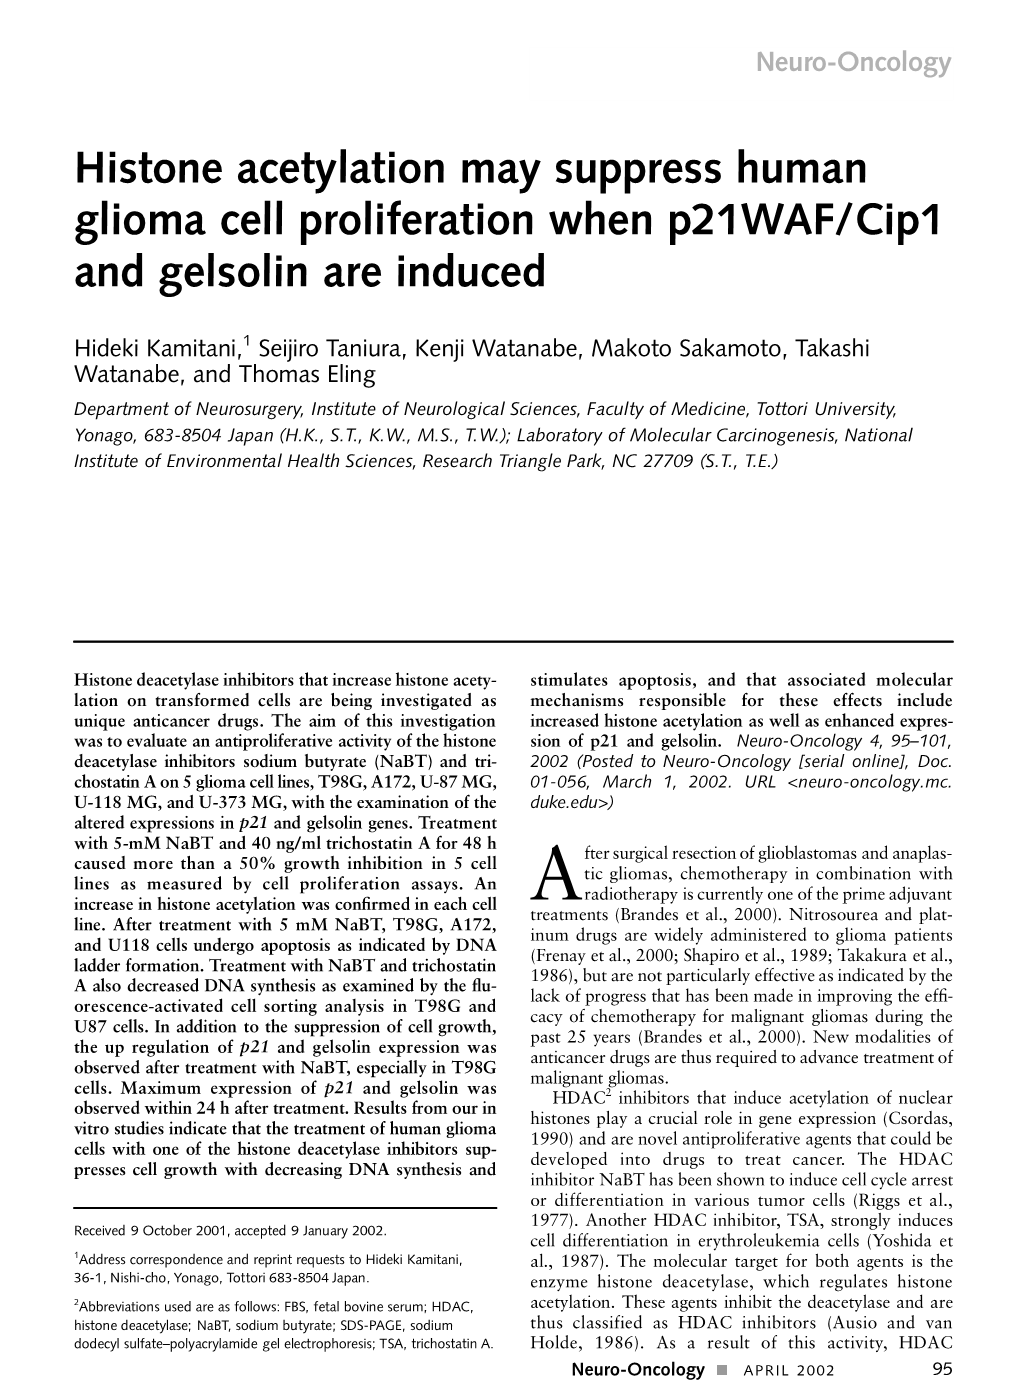 Histone Acetylation May Suppress Human Glioma Cell Proliferation When P21waf/Cip1 and Gelsolin Are Induced